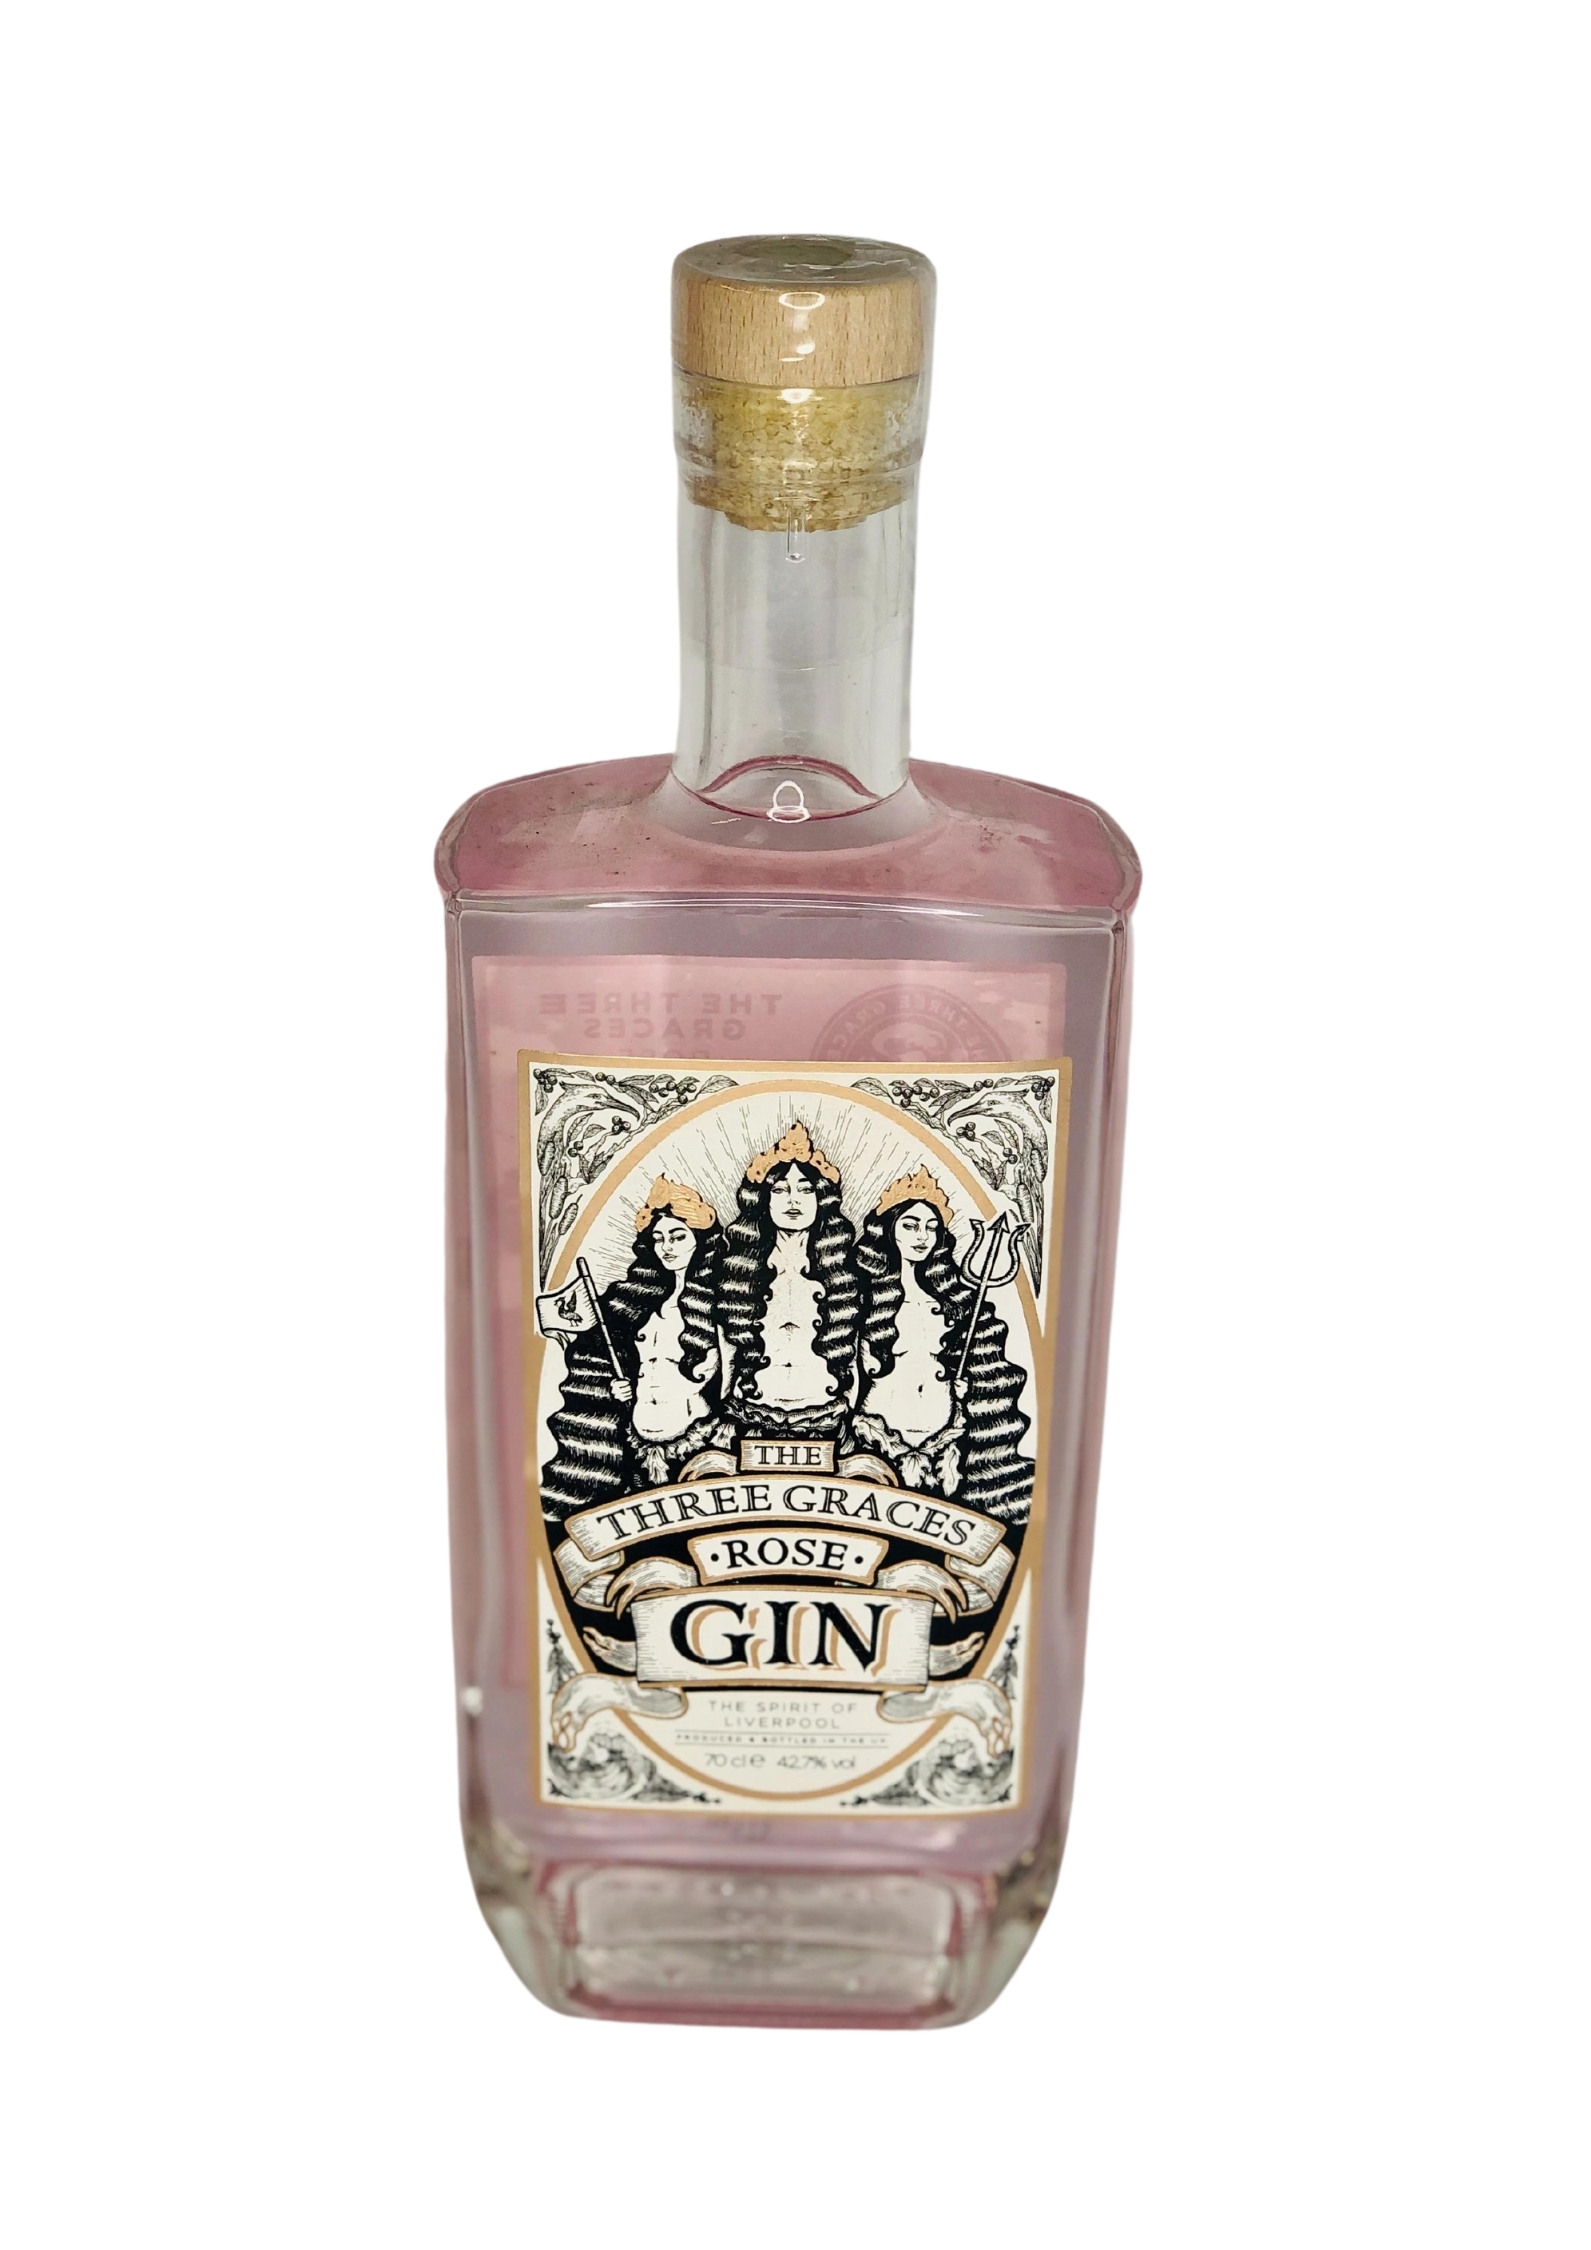 <h2>Rose Gin - The Three Graces Liverpool</h2>
<br>
<ul>
<li>70cl bottle of Rose Gin made in Liverpool from The Three Graces</li>
<li>Delivered by hand</li>
<li>Locally made Gin</li>
<li>This product contains alcohol and as such should only be bought for someone over the age of 18</li>
<li>For delivery area coverage see below</li>
</ul>
<br>
<h2>Gift Delivery Coverage</h2>
<p>Our shop delivers flowers and gifts to the following Liverpool postcodes L1 L2 L3 L4 L5 L6 L7 L8 L11 L12 L13 L14 L15 L16 L17 L18 L19 L24 L25 L26 L27 L36 L70 If your order is for an area outside of these we can organise delivery for you through our network of florists. We will ask them to make as close as possible to the image but because of the difference in stock and sundry items, it may not be exact.</p>
<br>
<h2>Alcohol Gifts</h2>
<p>As a licensed florist, we are able to supply alcoholic drinks either as a gift on their own or with flowers. We have carefully selected a range that we know you will love either as a gift in itself or to provide that extra bit of celebratory luxury to a floral gift.</p>
<p>This locally-made bottle of The Three Graces Rose Gin made in Liverpool is the perfect choice for a Gin lover!</p>
<p>Have this delivered to someone special to celebrate as an alternative to having flowers delivered, or have it delivered with your flowers to really celebrate!</p>
<p>Rose Gin is brewed in Liverpool by The Three Graces.</p>
<br>
<h2>Online Gift Ordering | Online Gift Delivery</h2>
<p>Through this website you can order 24 hours, Booker Gifts and Gifts Liverpool have put together this carefully selected range of Flowers, Gifts and Finishing Touches to make Gift ordering as easy as possible. This means even if you do not live in Liverpool we make it easy for you to see what you are getting when buying for delivery in Liverpool.</p>
<br>
<h2>Liverpool Flower and Gift Delivery</h2>
<p>We are open 7 days a week and offer advanced booking flower delivery, same-day flower delivery, Guaranteed AM Flower Delivery and also offer Sunday Flower Delivery.</p>
<p>Our florists Deliver in Liverpool and can provide flowers for you in Liverpool, Merseyside. And through our network of florists can organise flower deliveries for you nationwide.</p>
<br>
<h2>Beautiful Gifts Delivered | Best Florist in Liverpool</h2>
<p>Having been nominated the Best Florist in Liverpool by the independent Three Best Rated for the 5th year running you can feel secure with us</p>
<p>You can trust Booker Gifts and Gifts to deliver the very best for you.</p>
<br>
<h2>5 Star Google Review</h2>
<p><em>So Pleased with the product and service received. I am working away currently, so ordered online, and after my own misunderstanding with online payment, I contacted the florist directly to query. Gemma was very prompt and helpful, and my flowers were arranged easily. They arrived this morning and were as impactful as the pictures on the website, and the quality of the flowers and the arrangement were excellent. Great Work! David Welsh</em></p>
<br>